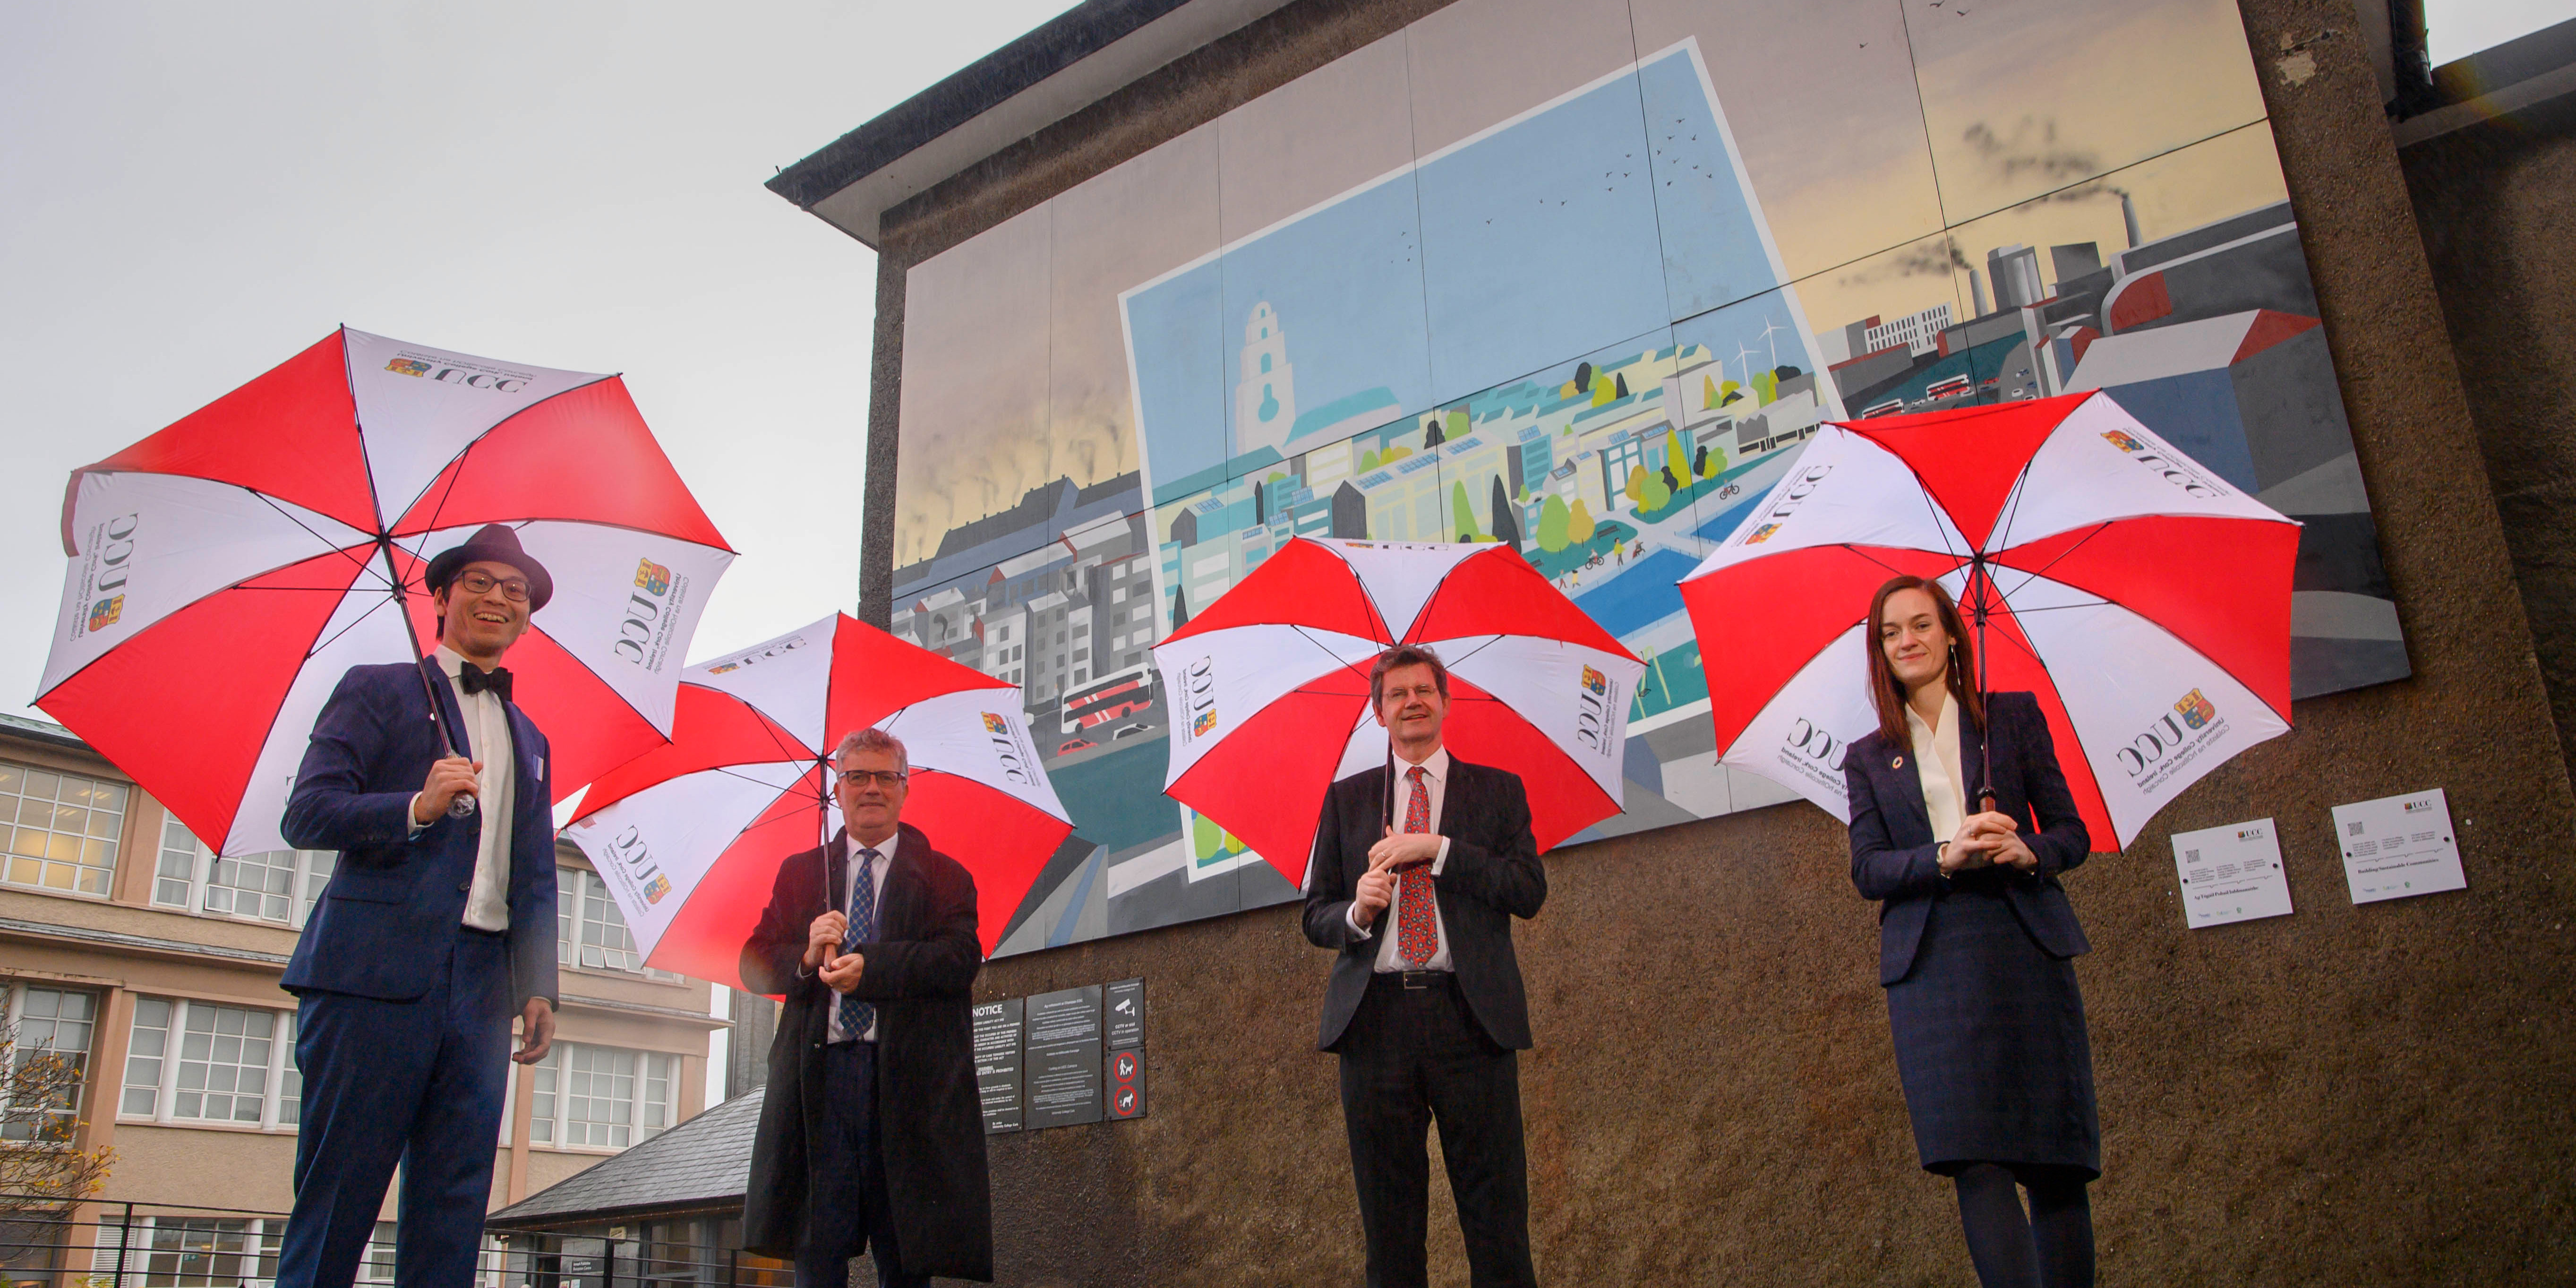 Pictured at UCC’s sustainable communities mural are:  The British Ambassador to Ireland, H.E Mr Paul Johnston, Professor John O’Halloran, UCC President and UCC COP26 delegation members Dr Kian Mintz-Woo and Dr Marguerite Nyhan.